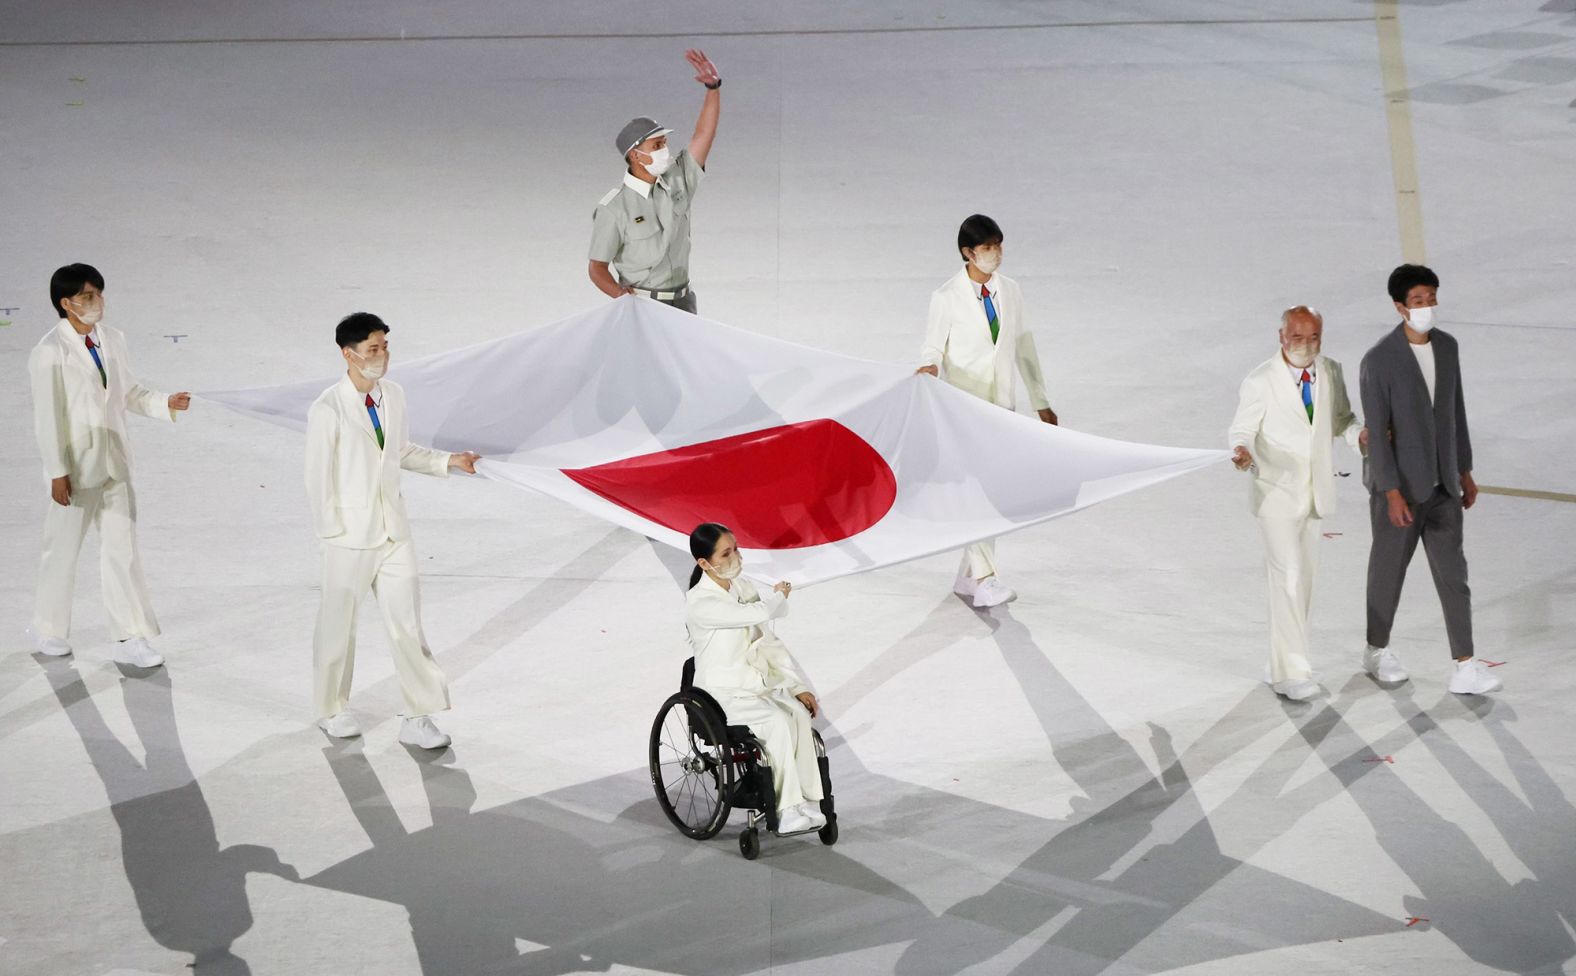 Health-care workers present the Japanese flag during the opening ceremony. The Paralympics are taking place amid Japan's worst outbreak of Covid-19.